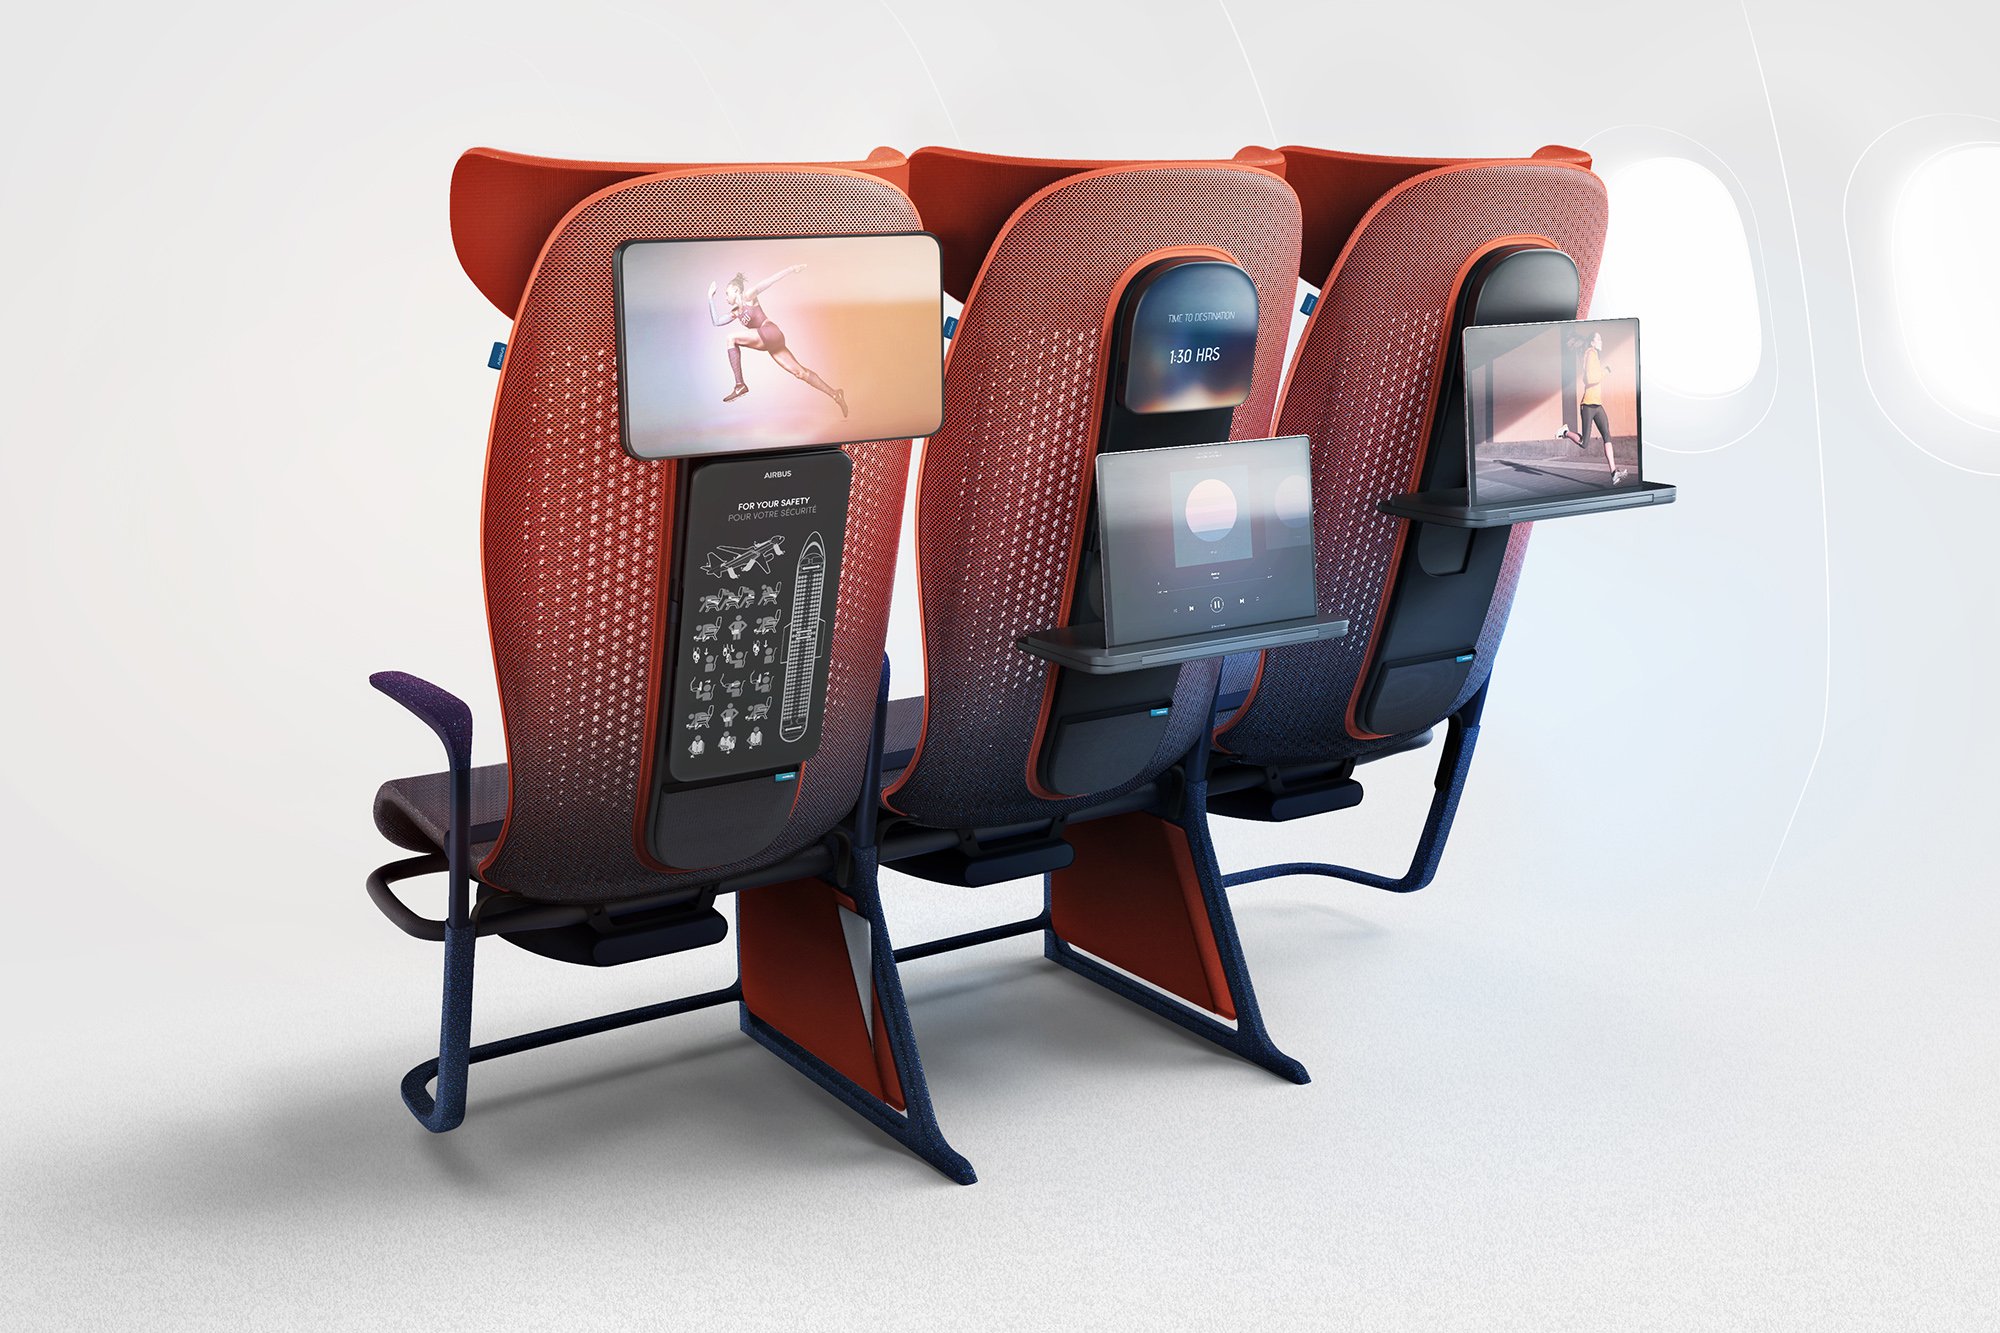 Move – a prototype of a new economy class seating for Airbus by design agency LAYER